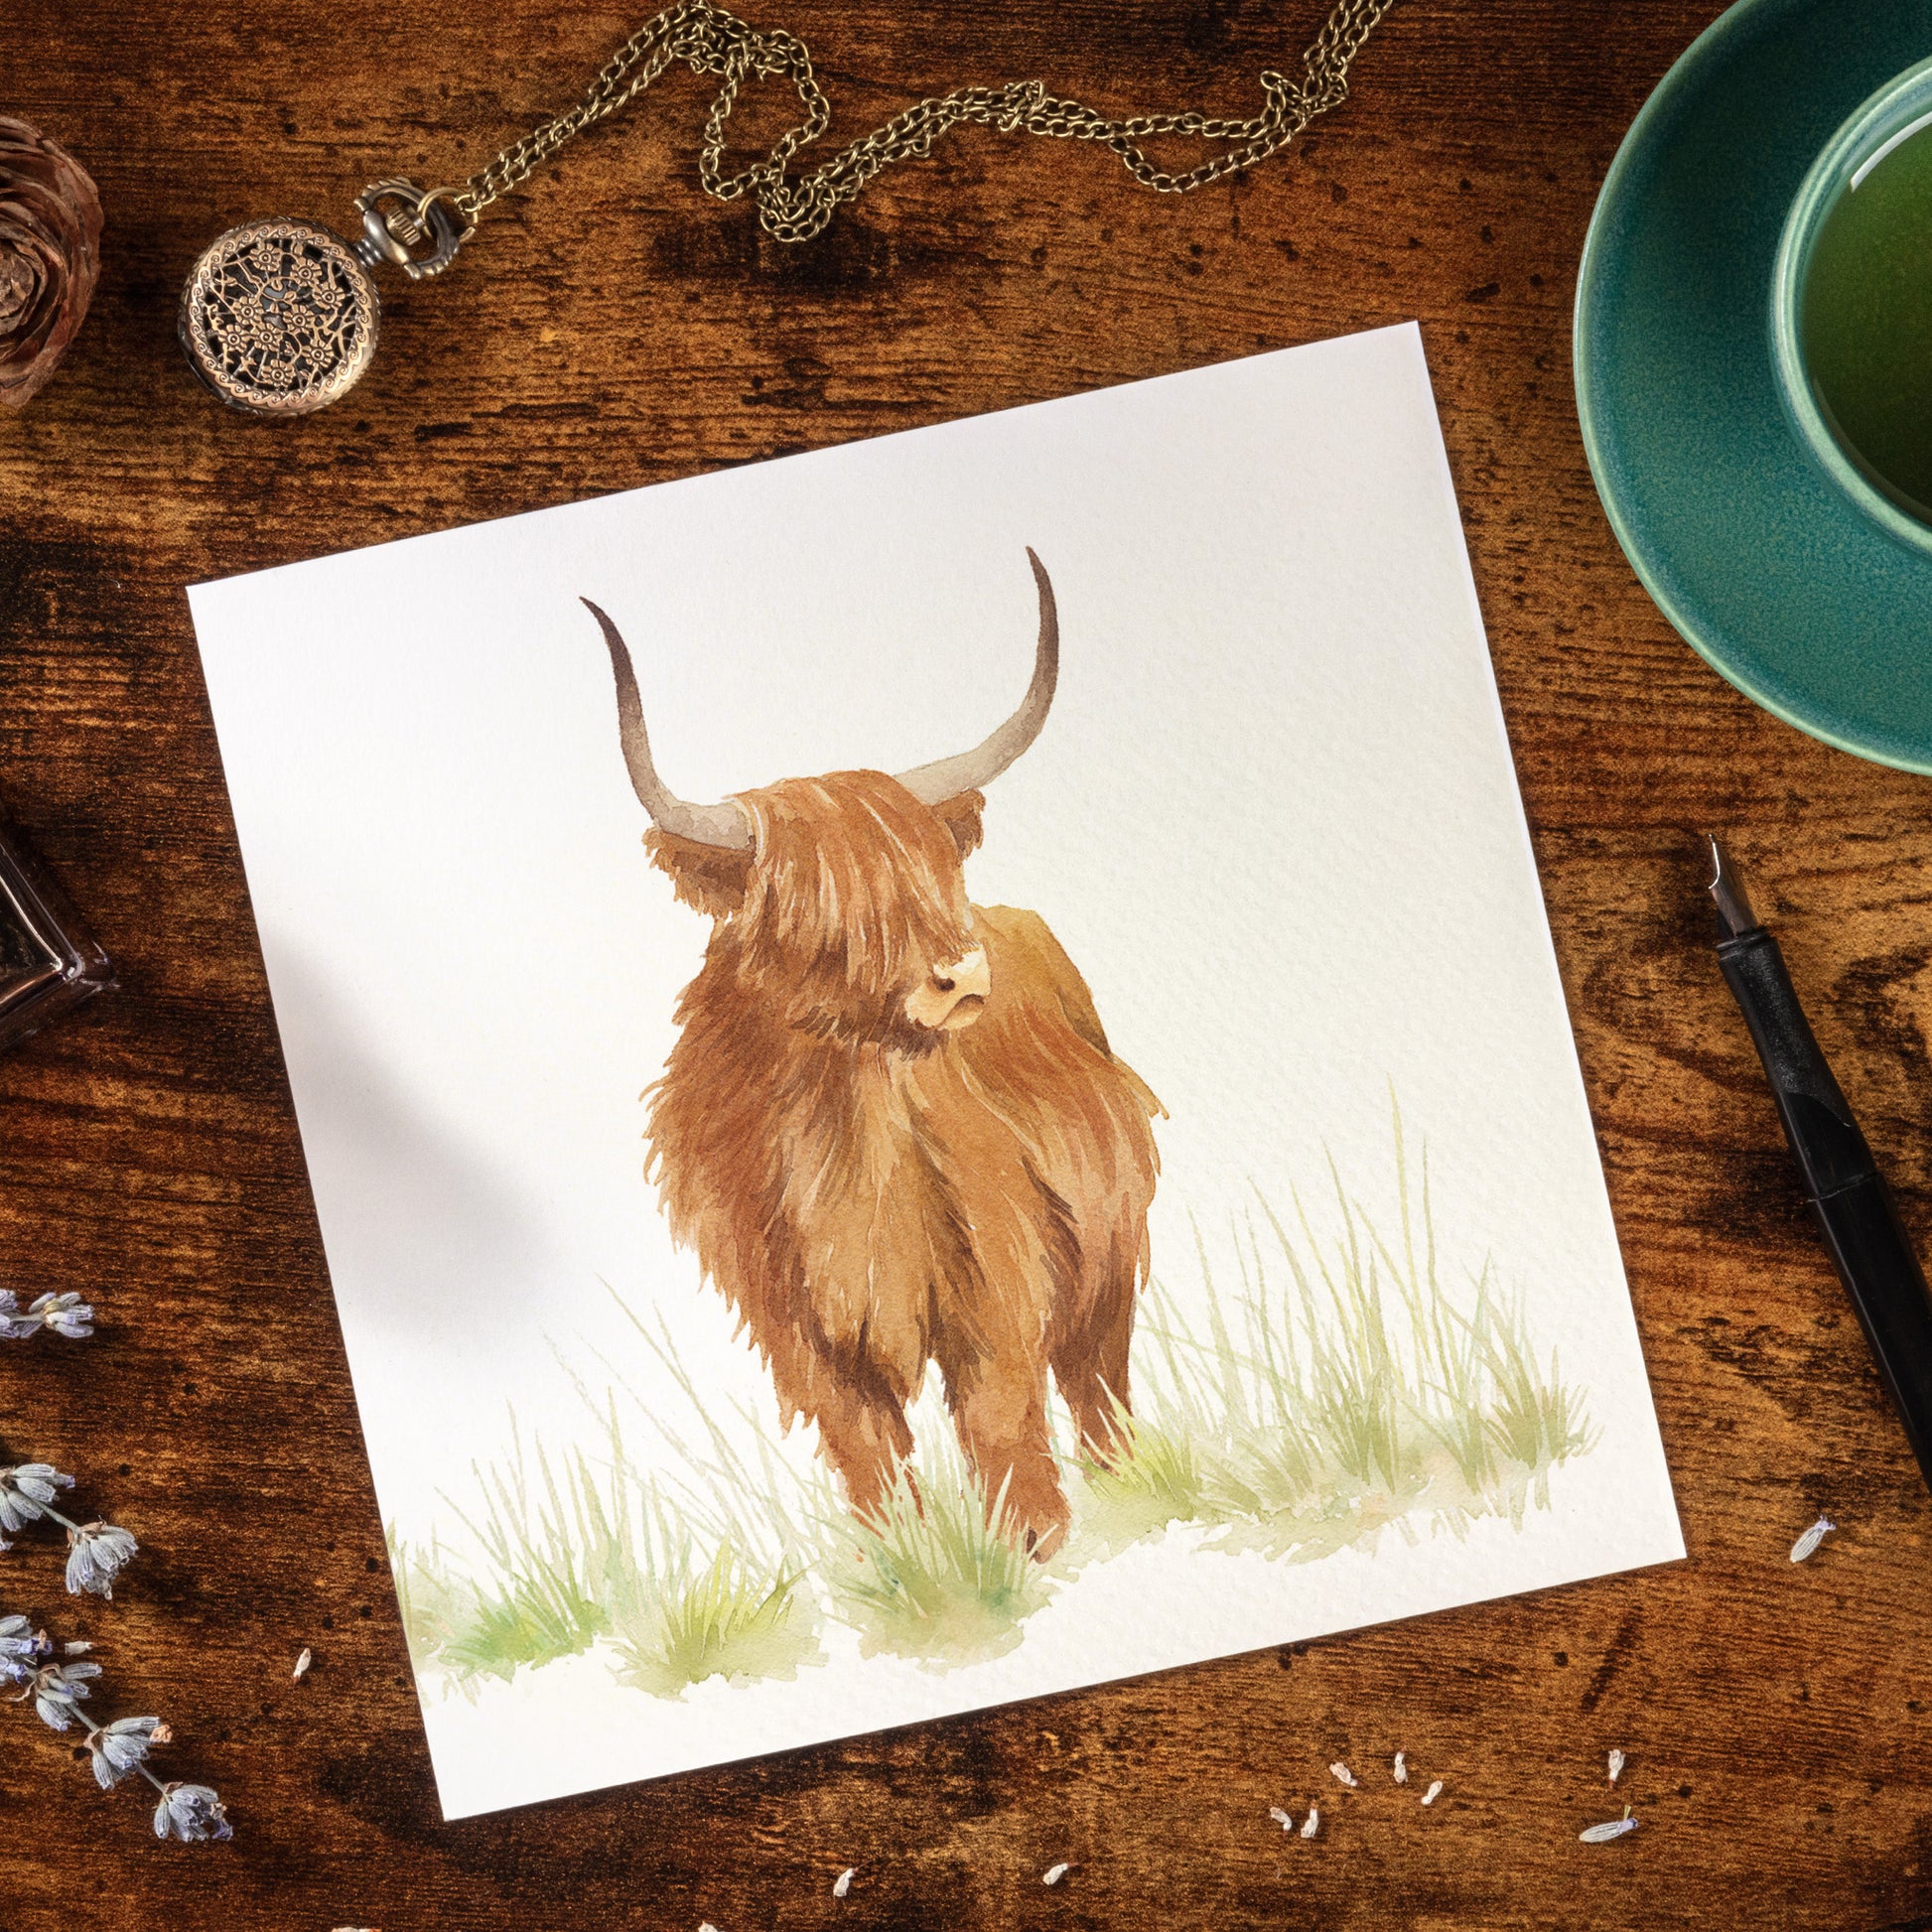 A greetings card laid flat on a table surrounded by writing items including a fountain pen and ink. The card features a highland cow in a watercolour style.